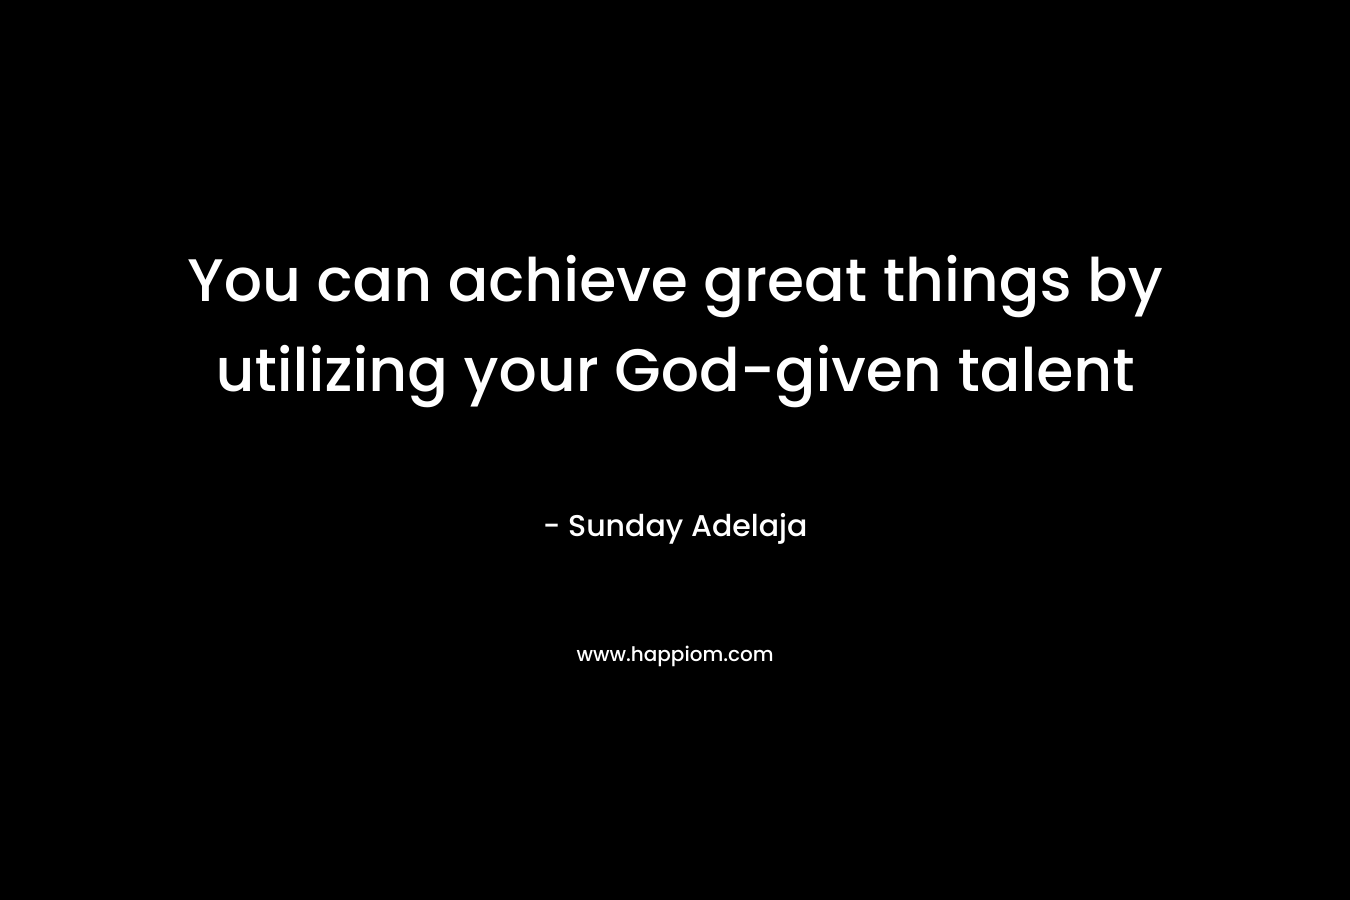 You can achieve great things by utilizing your God-given talent